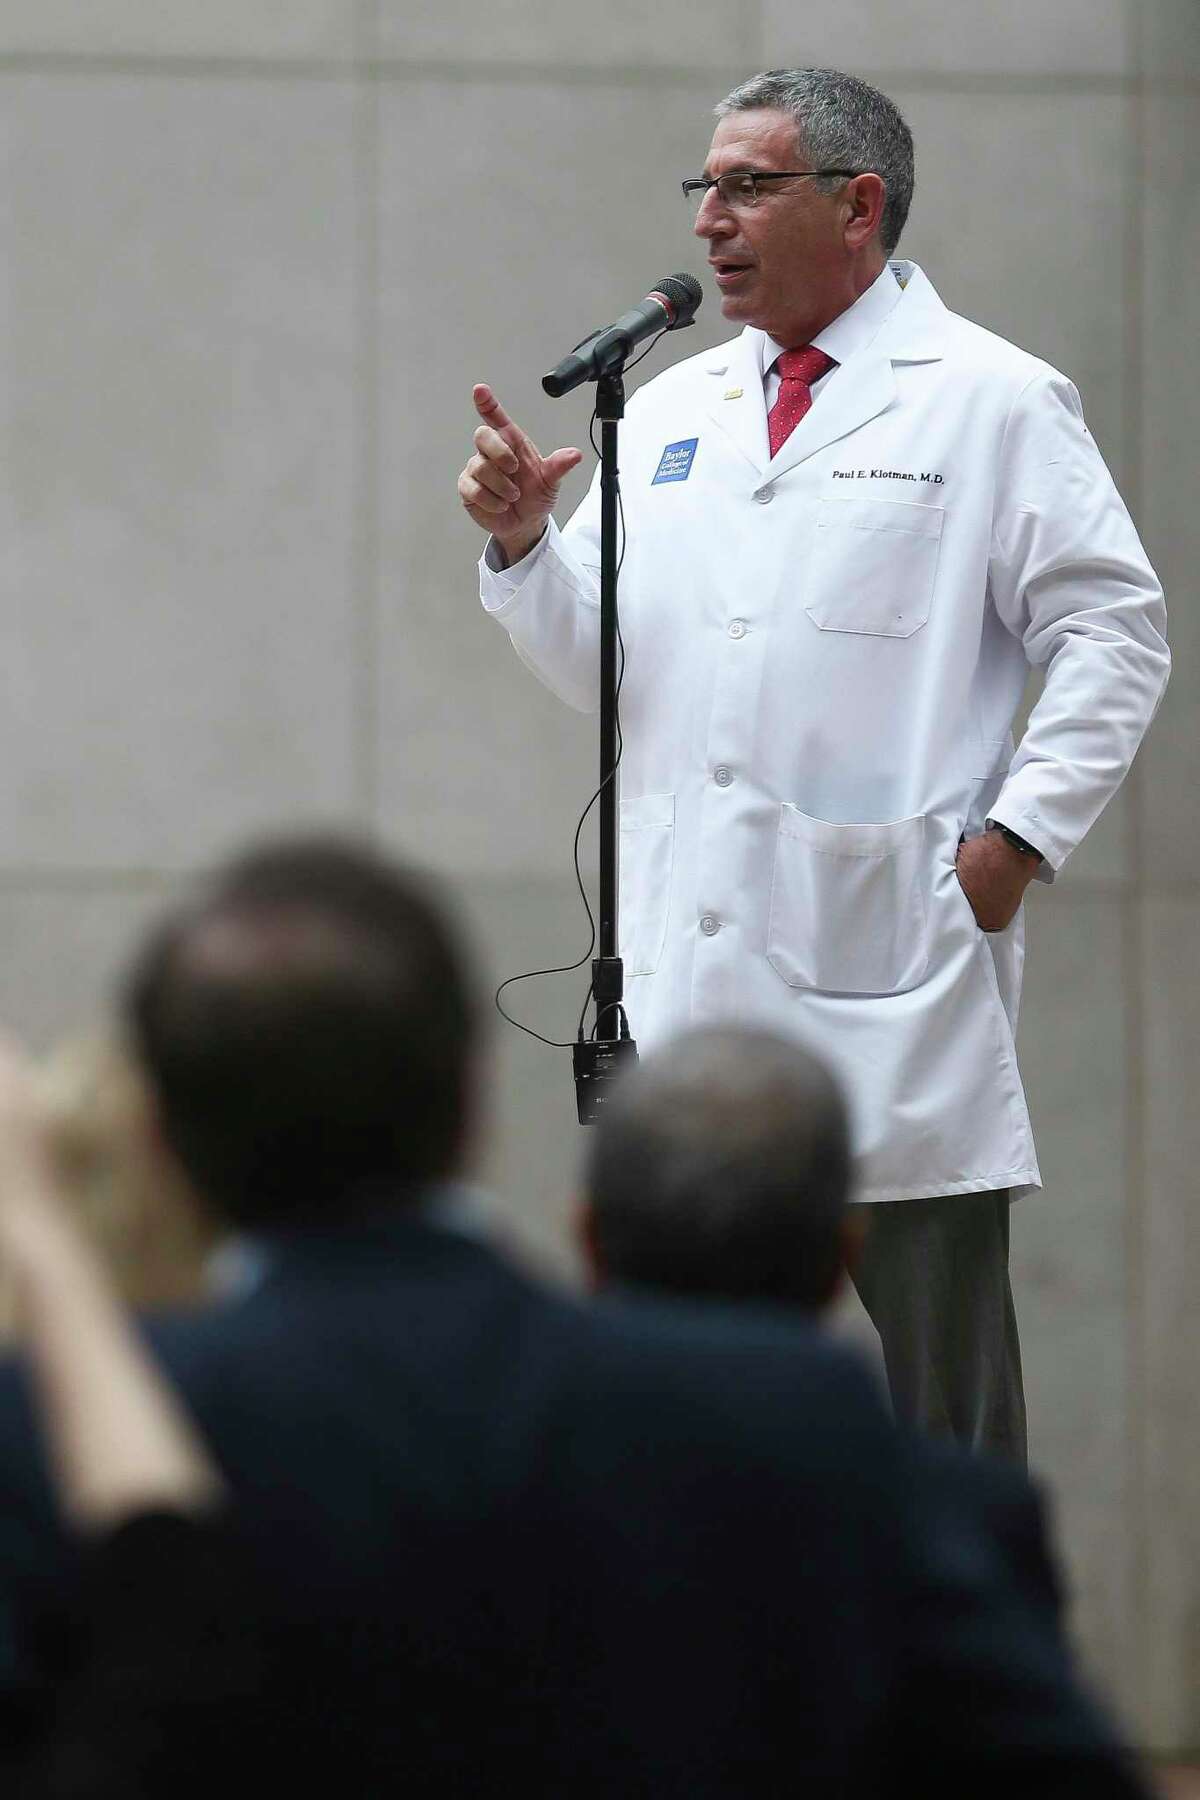 Baylor College of Medicine president, CEO and executive dean Dr. Paul Klotman speaks during Match Day Friday, March 16, 2018 in Houston. Match Day pairs fourth-year medical students with residency programs across the country for their next three to six years of training. (Michael Ciaglo / Houston Chronicle)